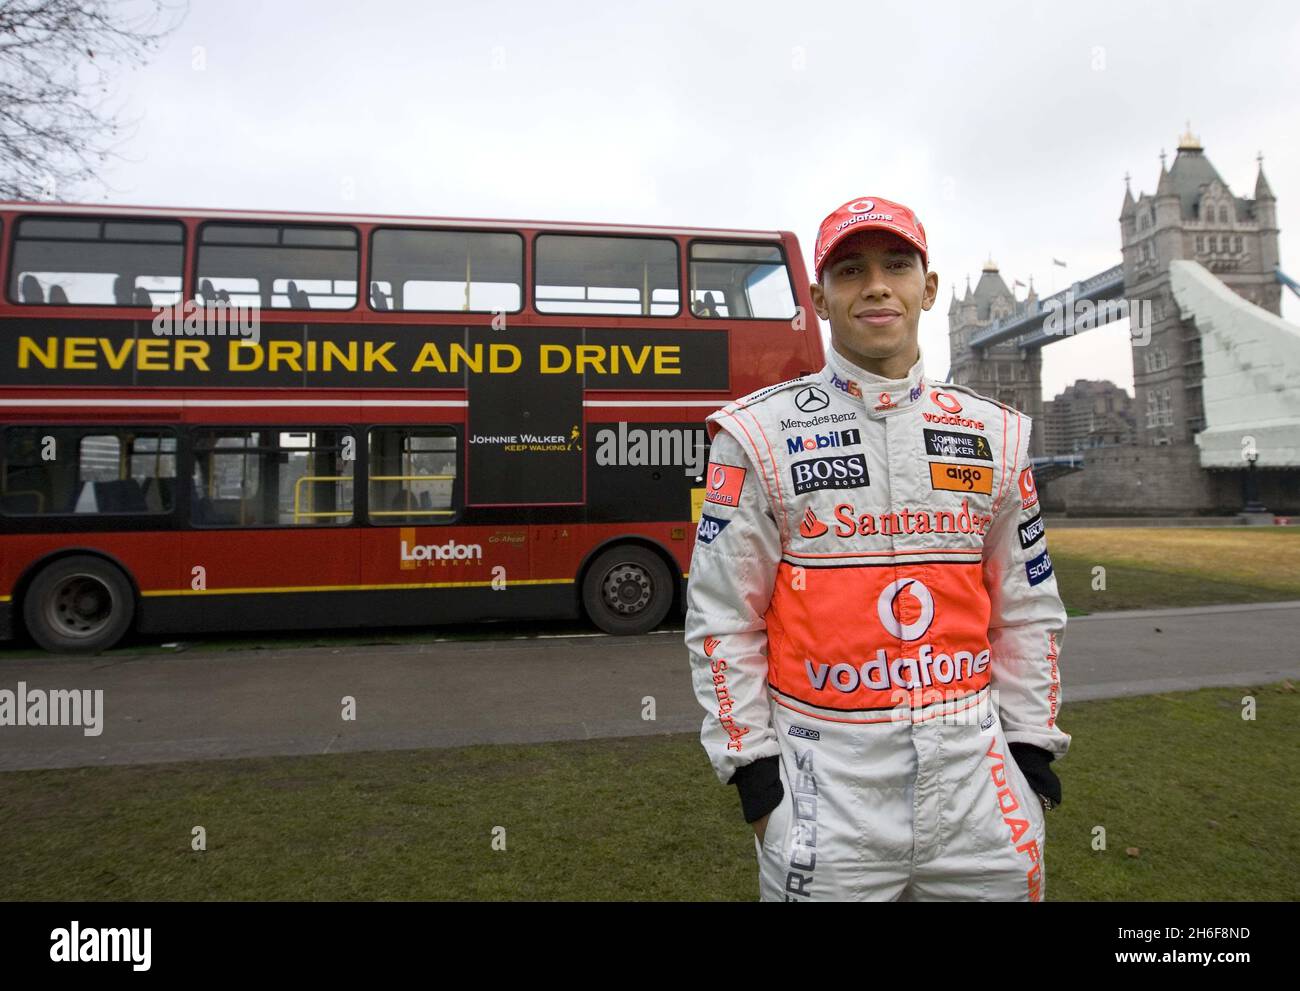 Lewis Hamilton, the 2008 Formula 1 World Champion, during the Johnnie Walker  anti-drink drive campaign, reminding people to never drink and drive and to  use public transport to get home safely over